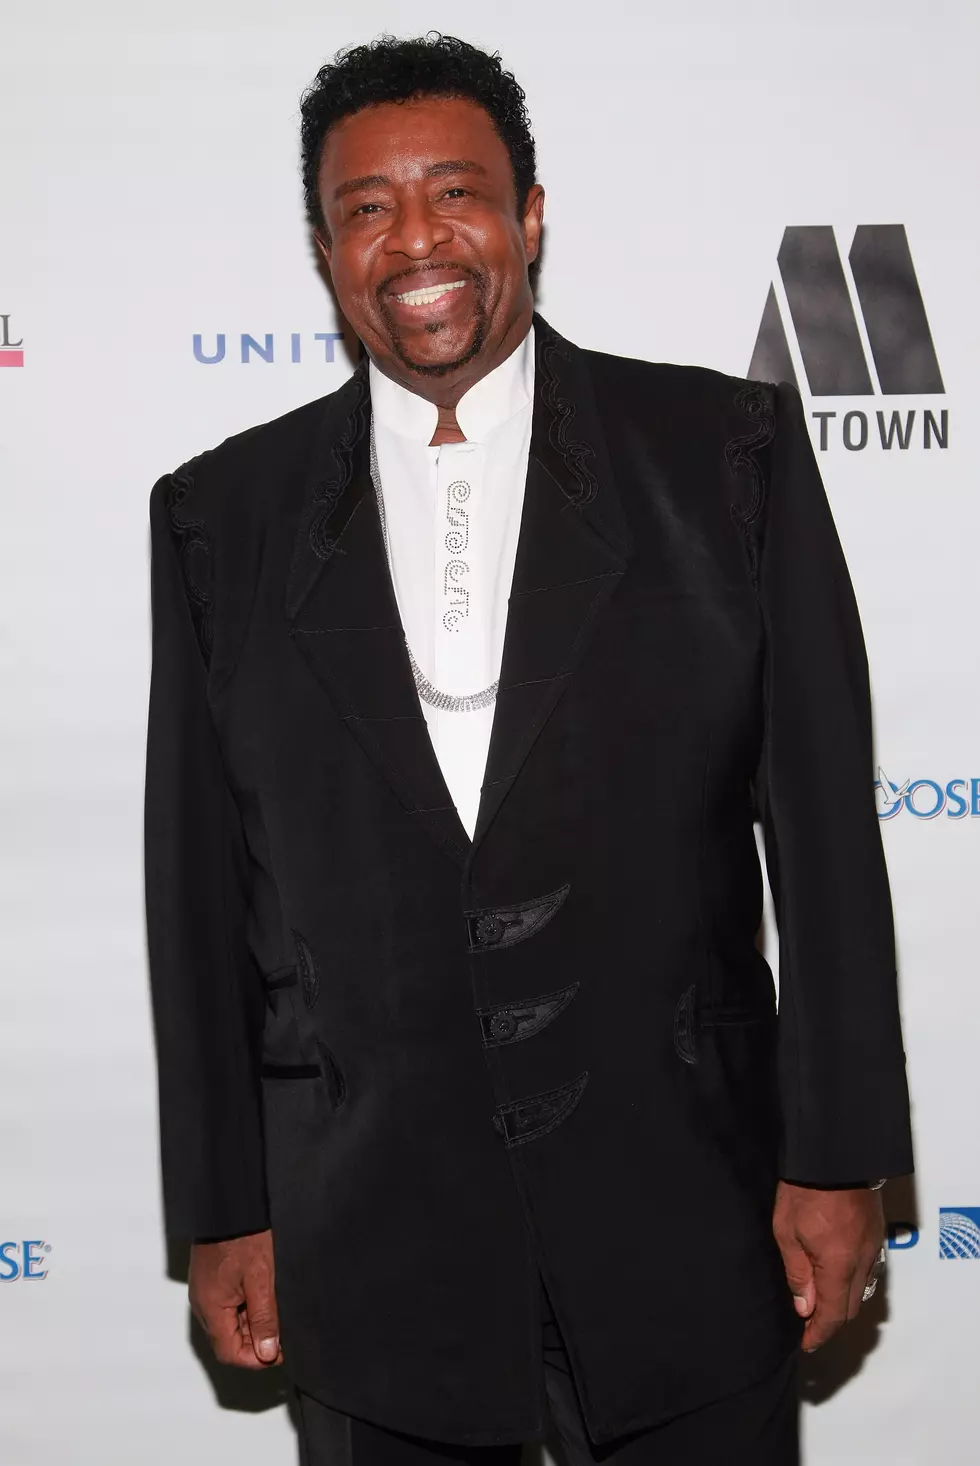 February 3rd in Black Music History — Temptations Singer Was Born in Alabama